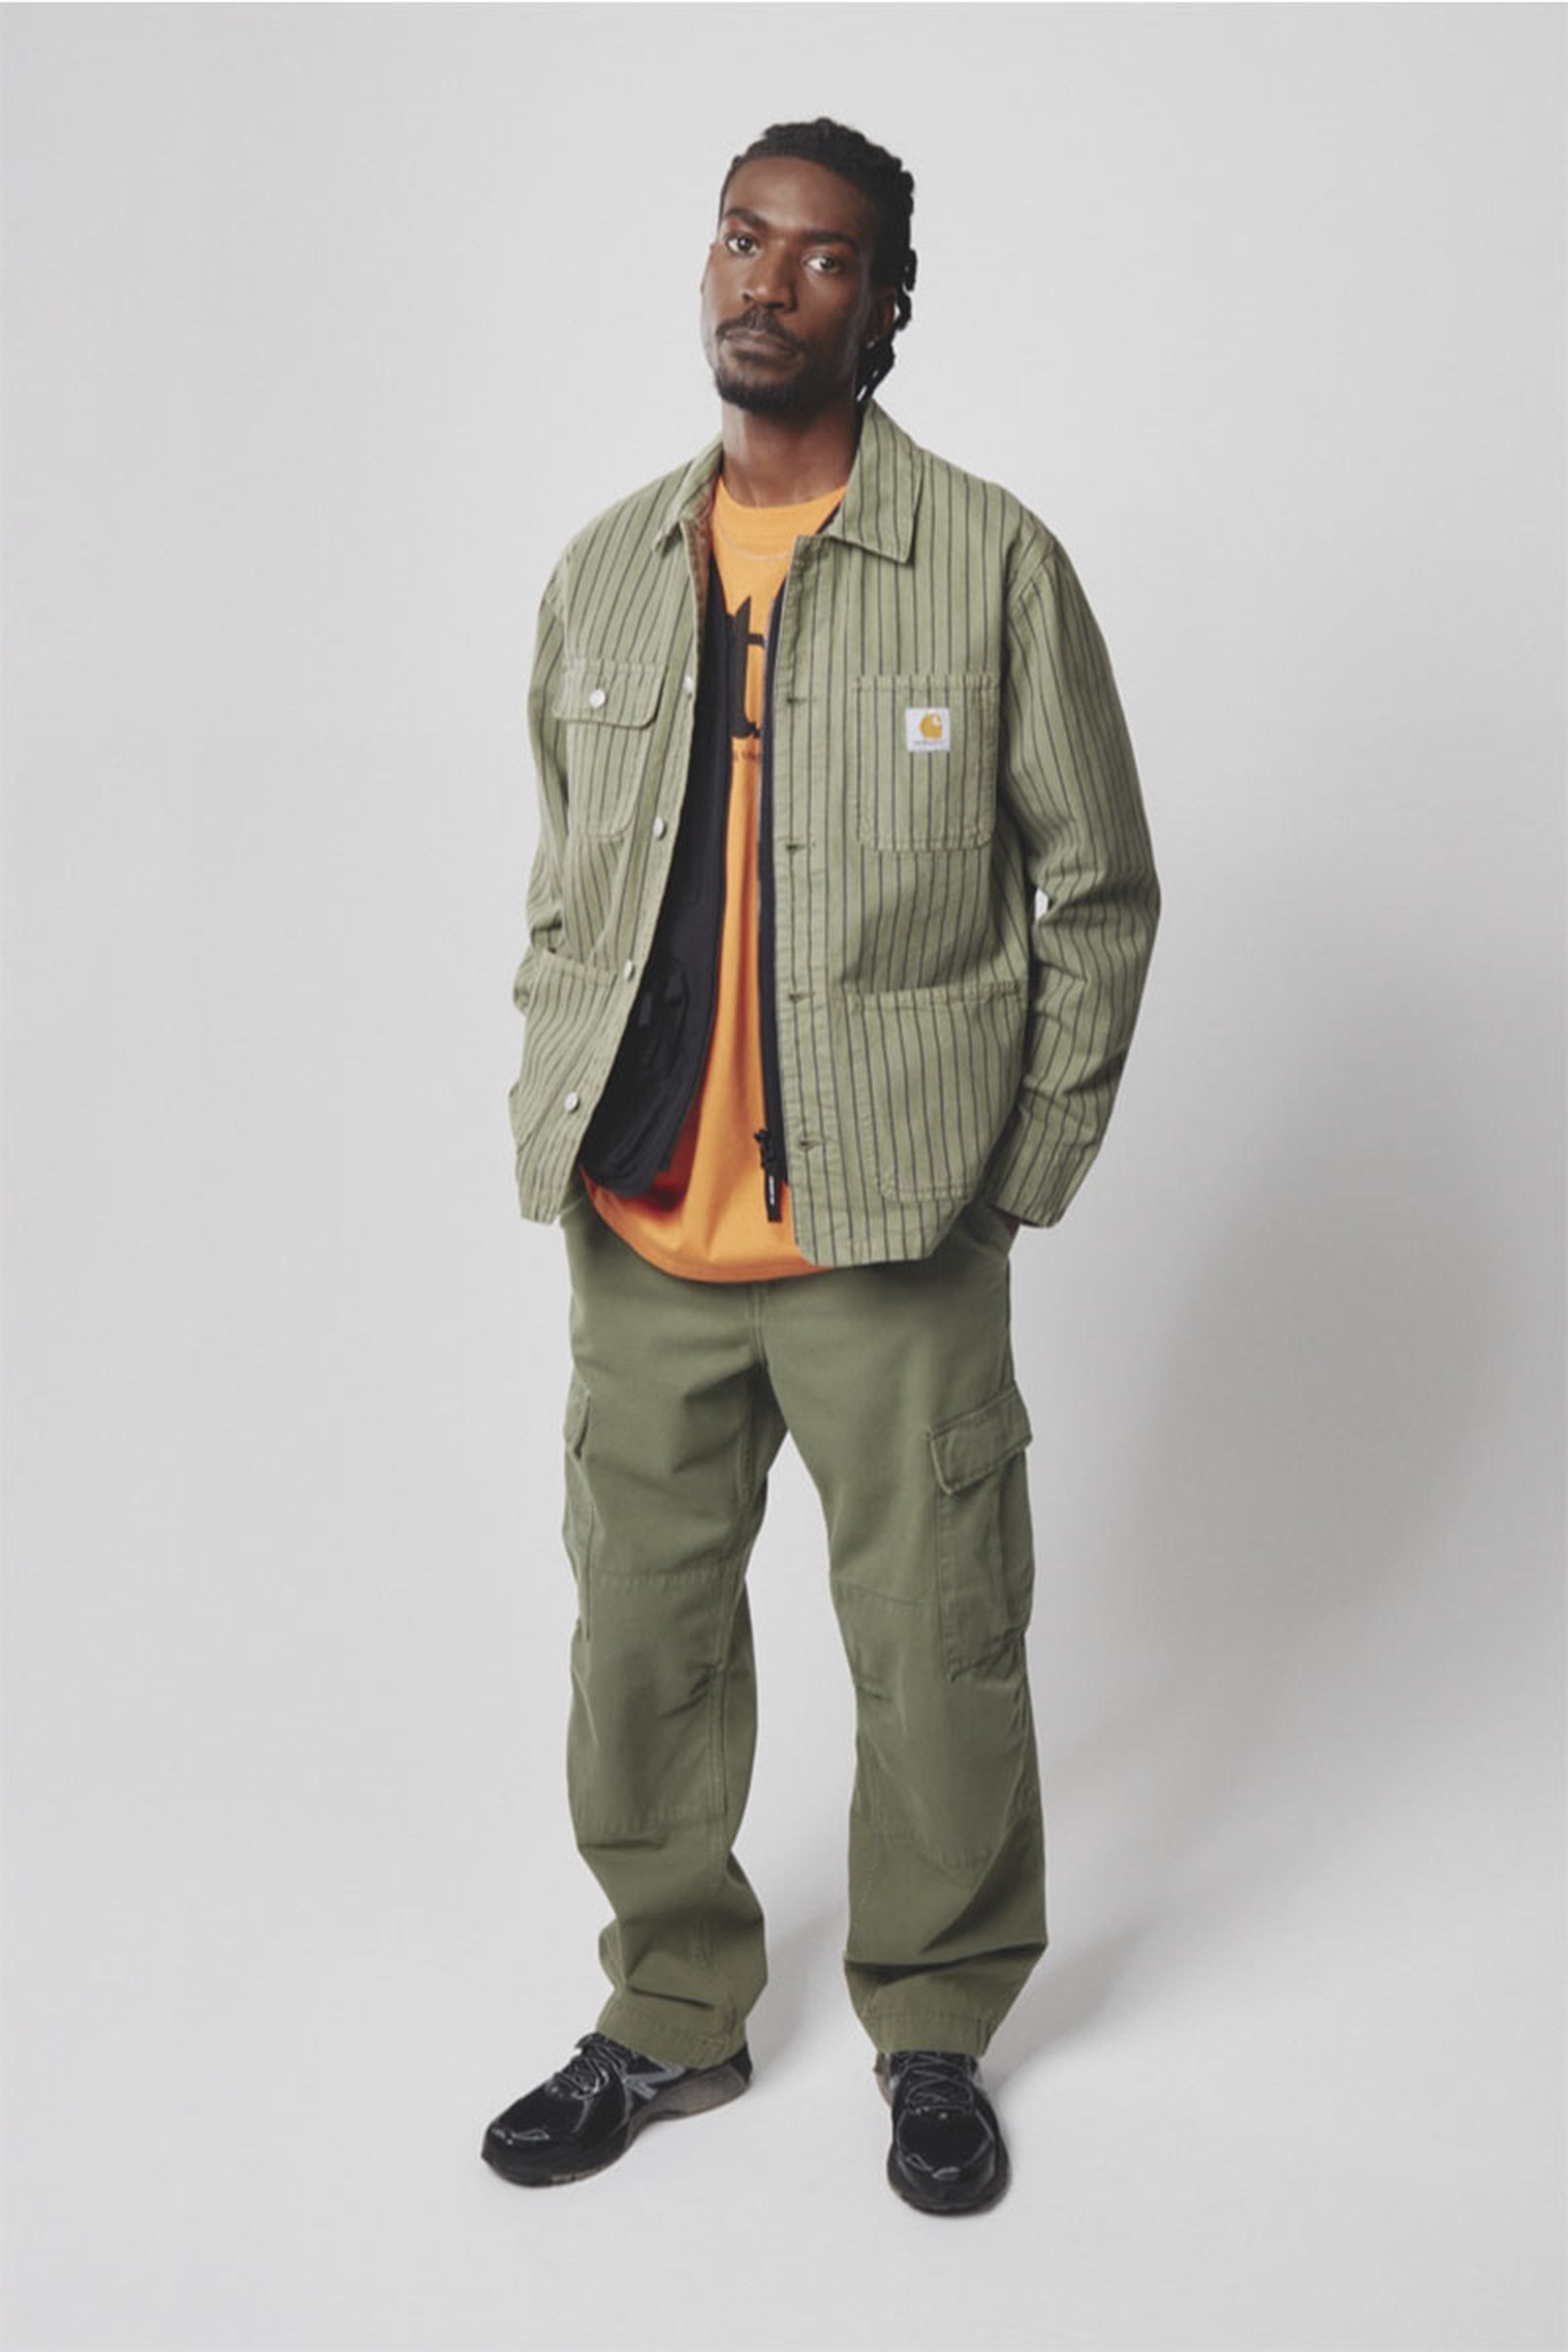 Carhartt WIP Spring/Summer 2022 Collection: Release Information